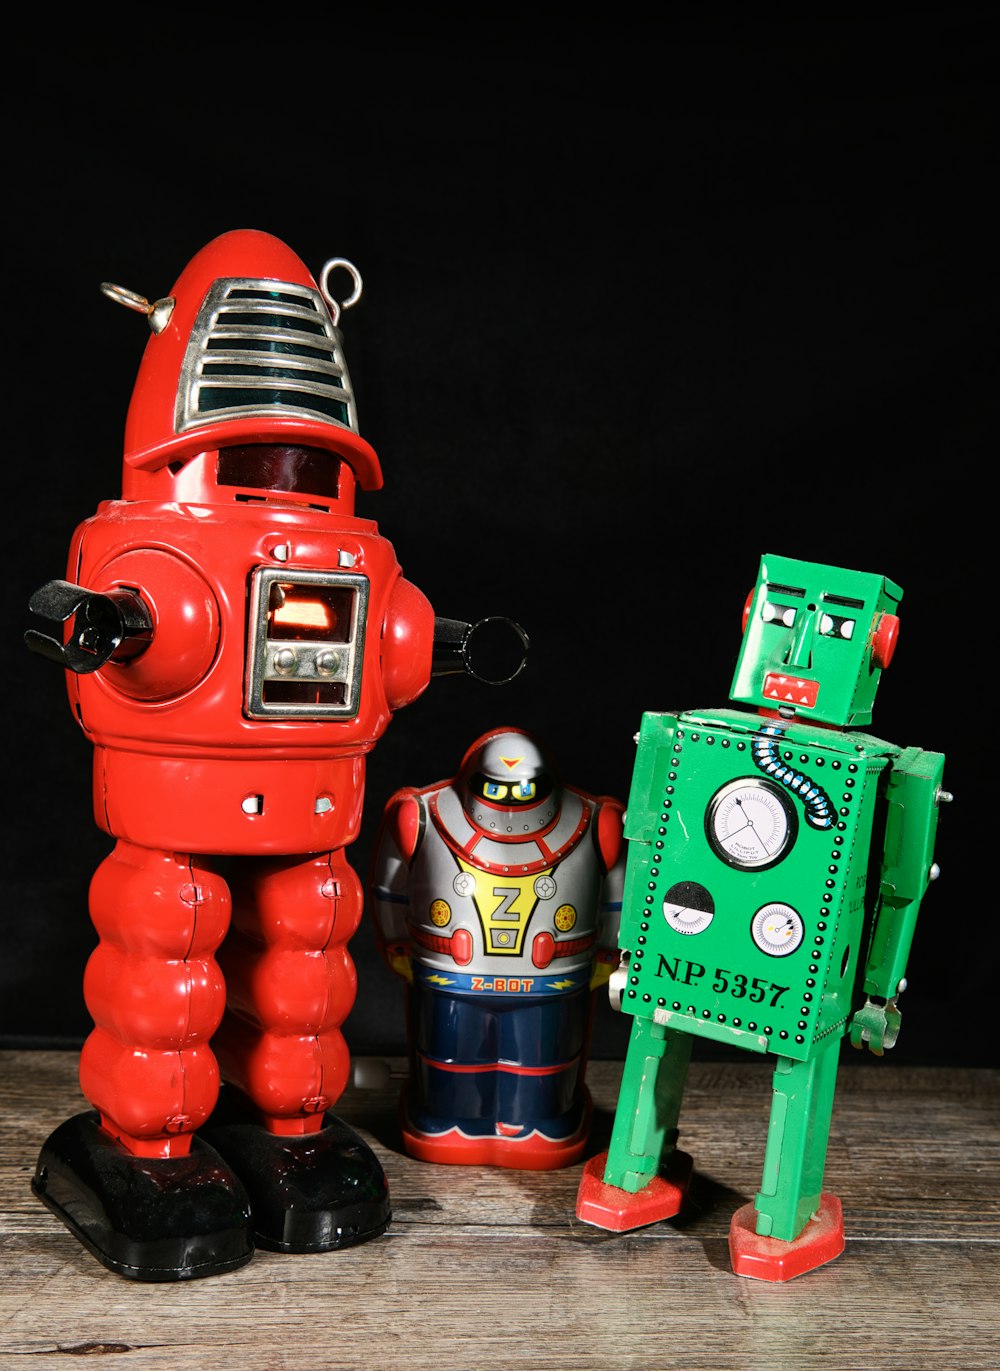 a red robot next to a green robot on a wooden table